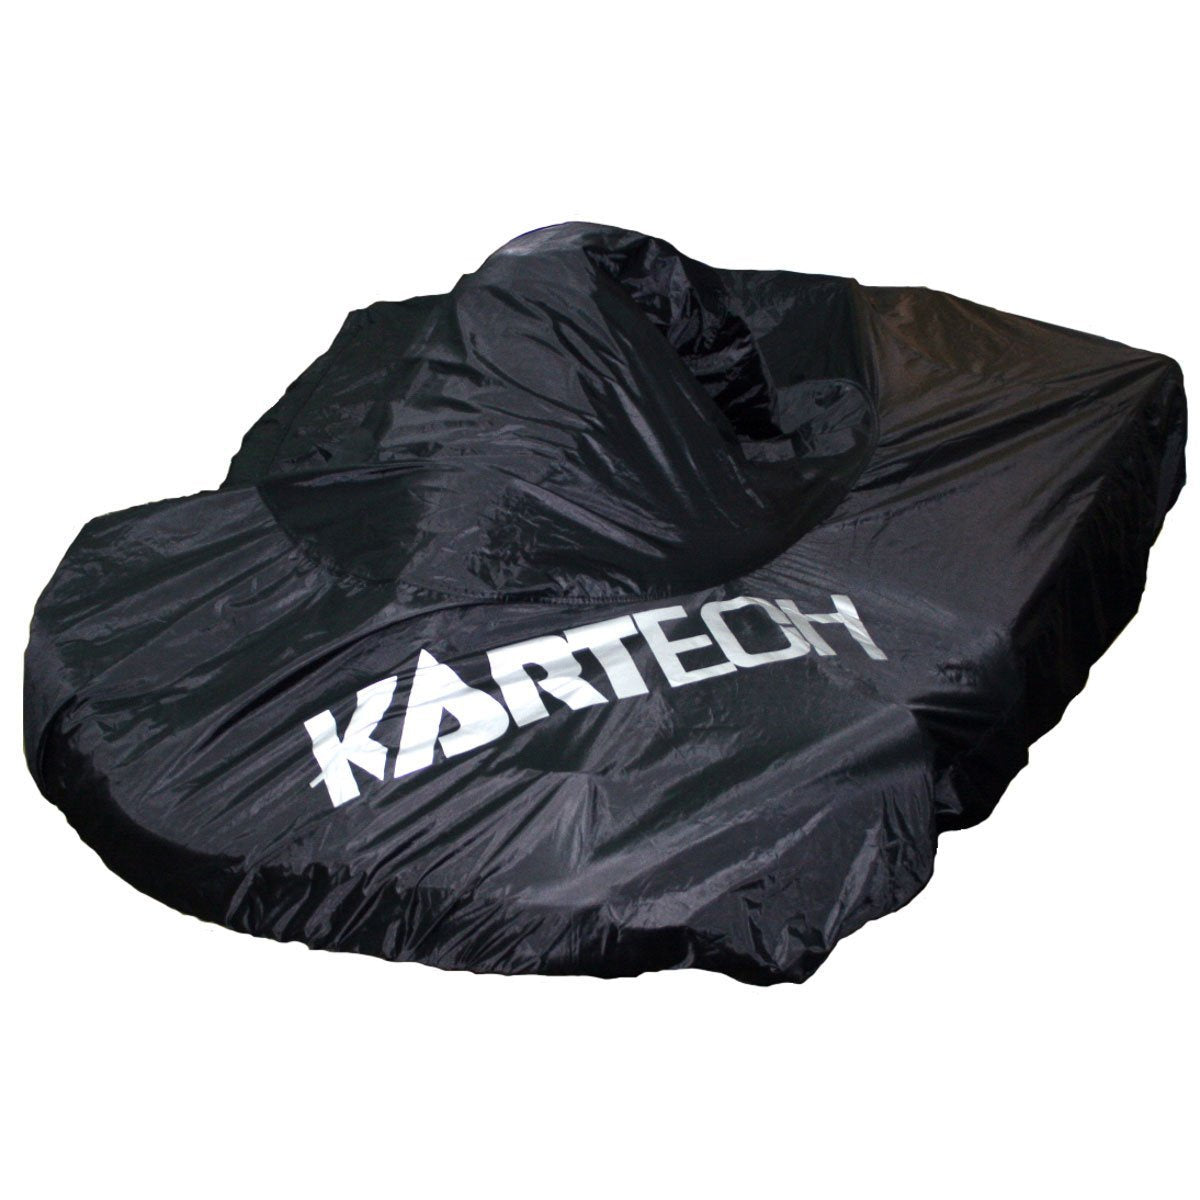 Kartech Kart Cover  With Silver Logo Waterproof